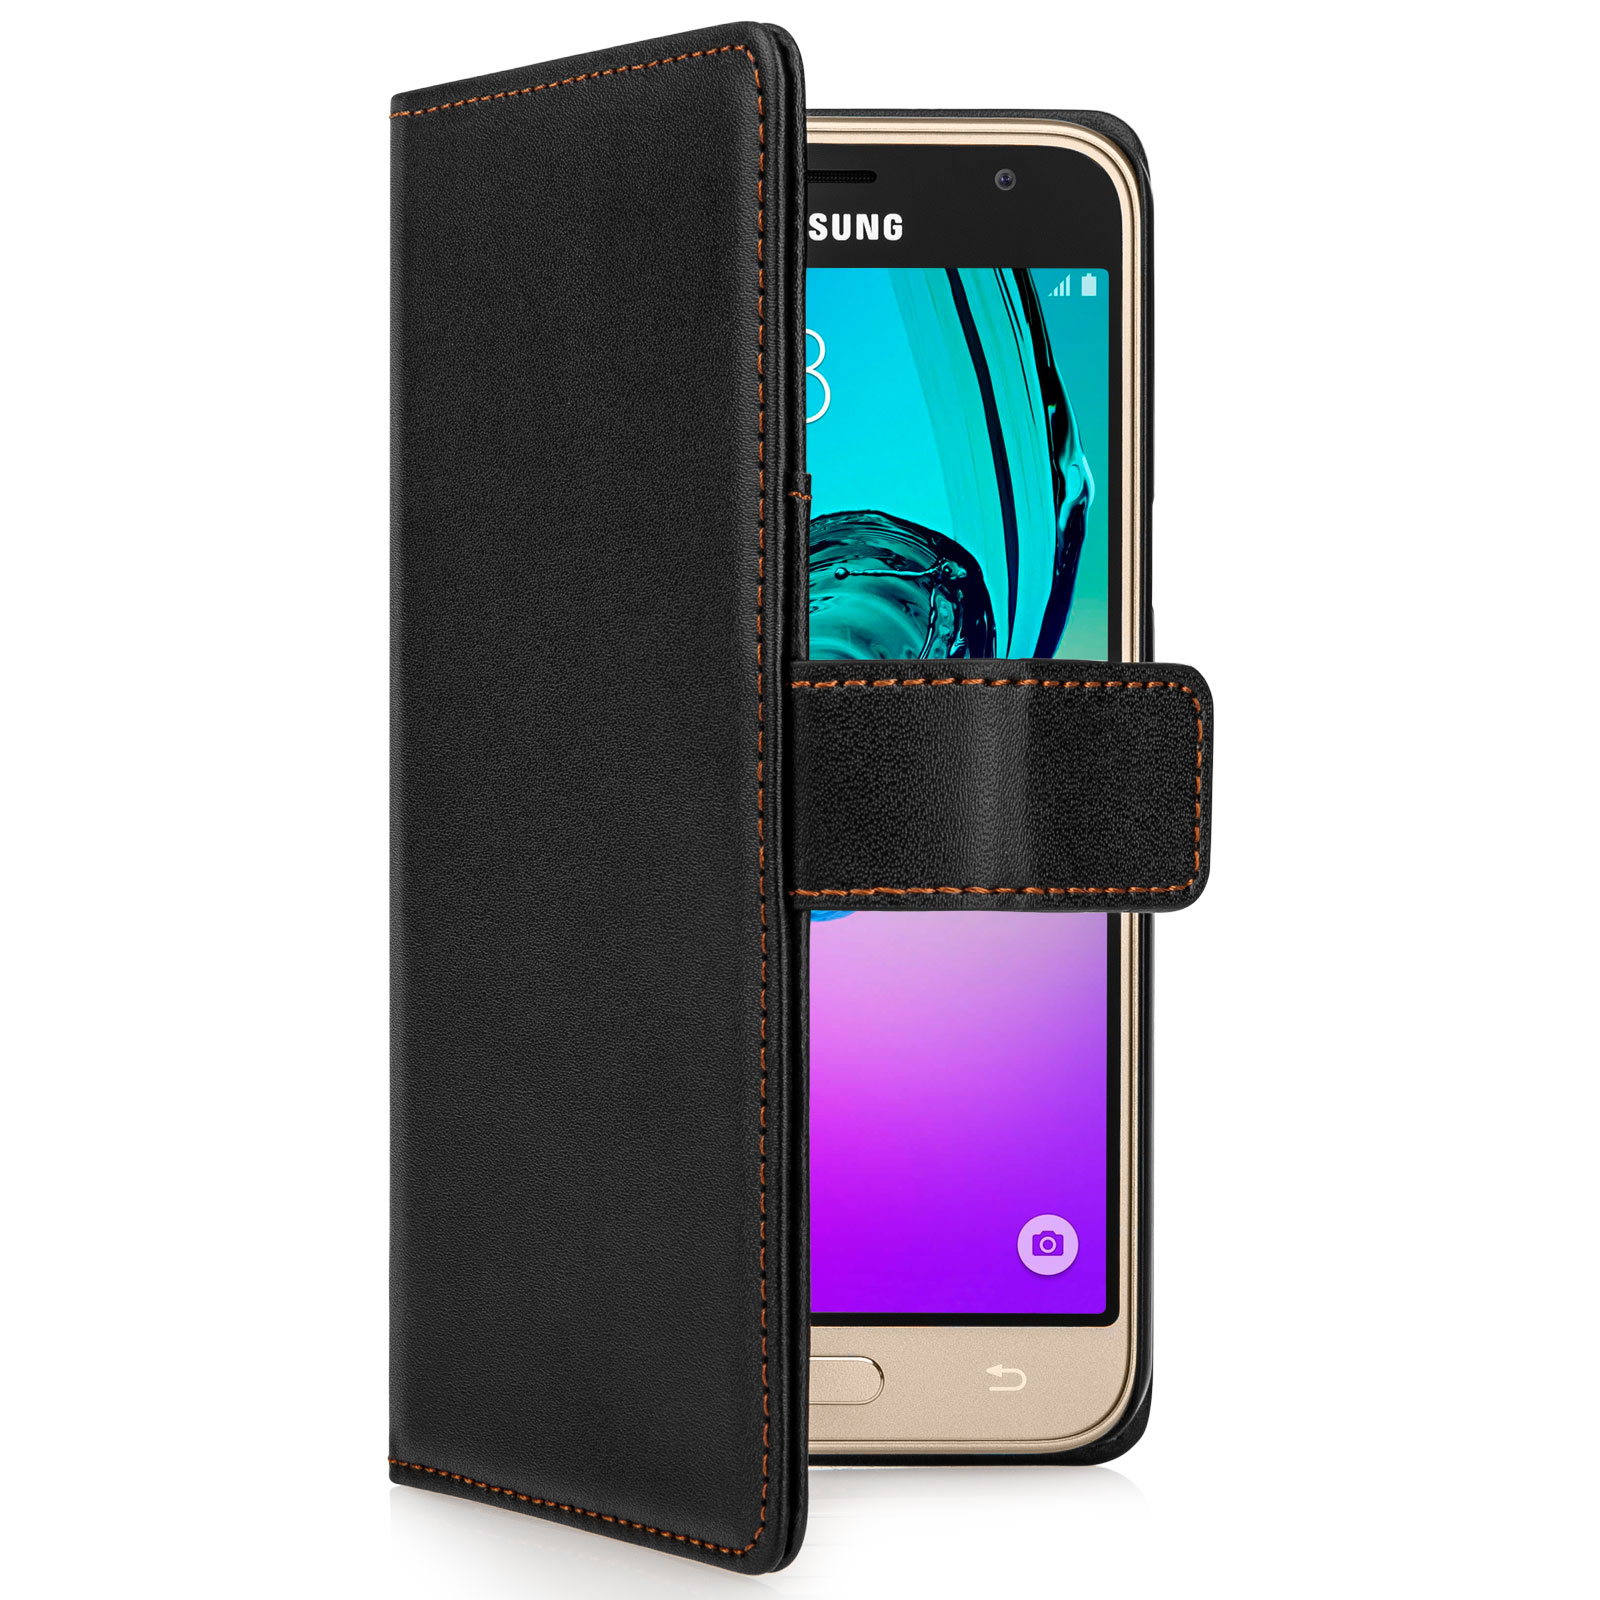 Yousave Accessories Samsung Galaxy J3 Leather-Effect Wallet Case - Black